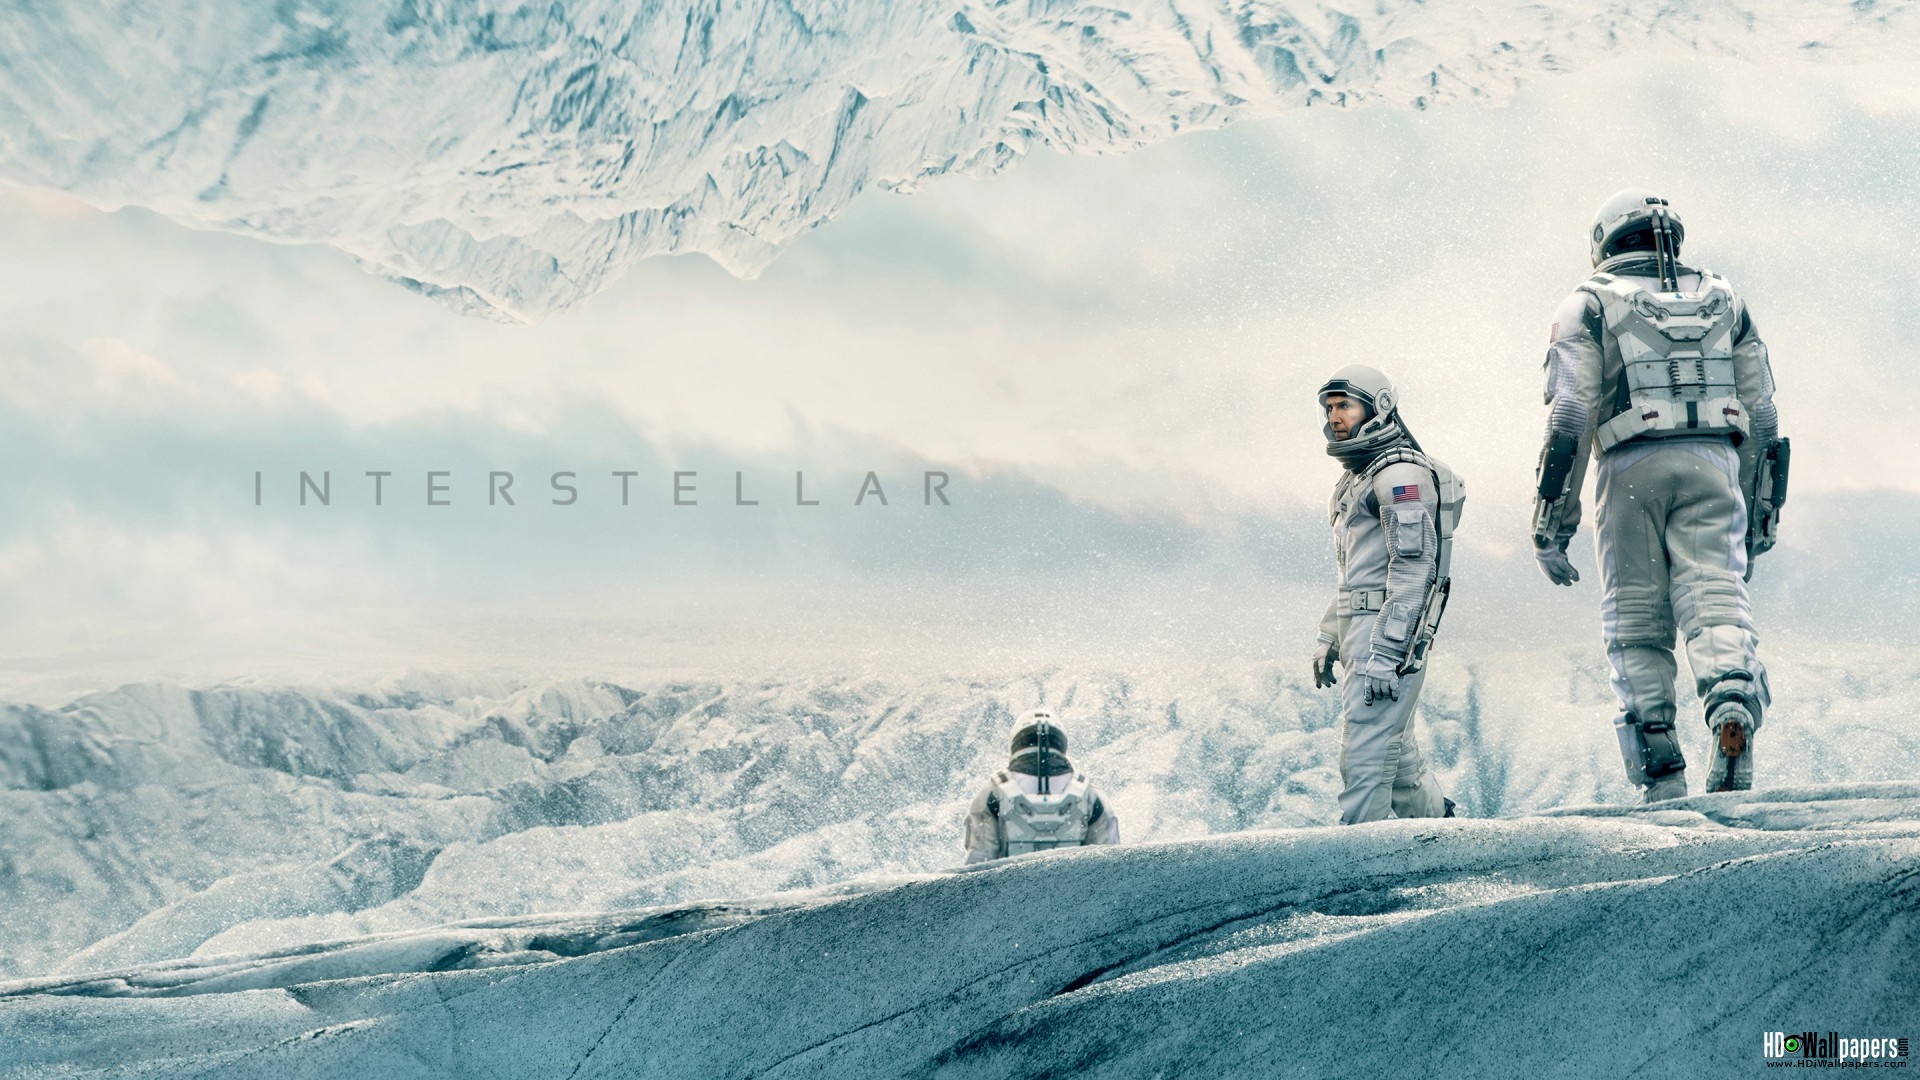 You Are At Home Film Scores Soundtrack Re Interstellar